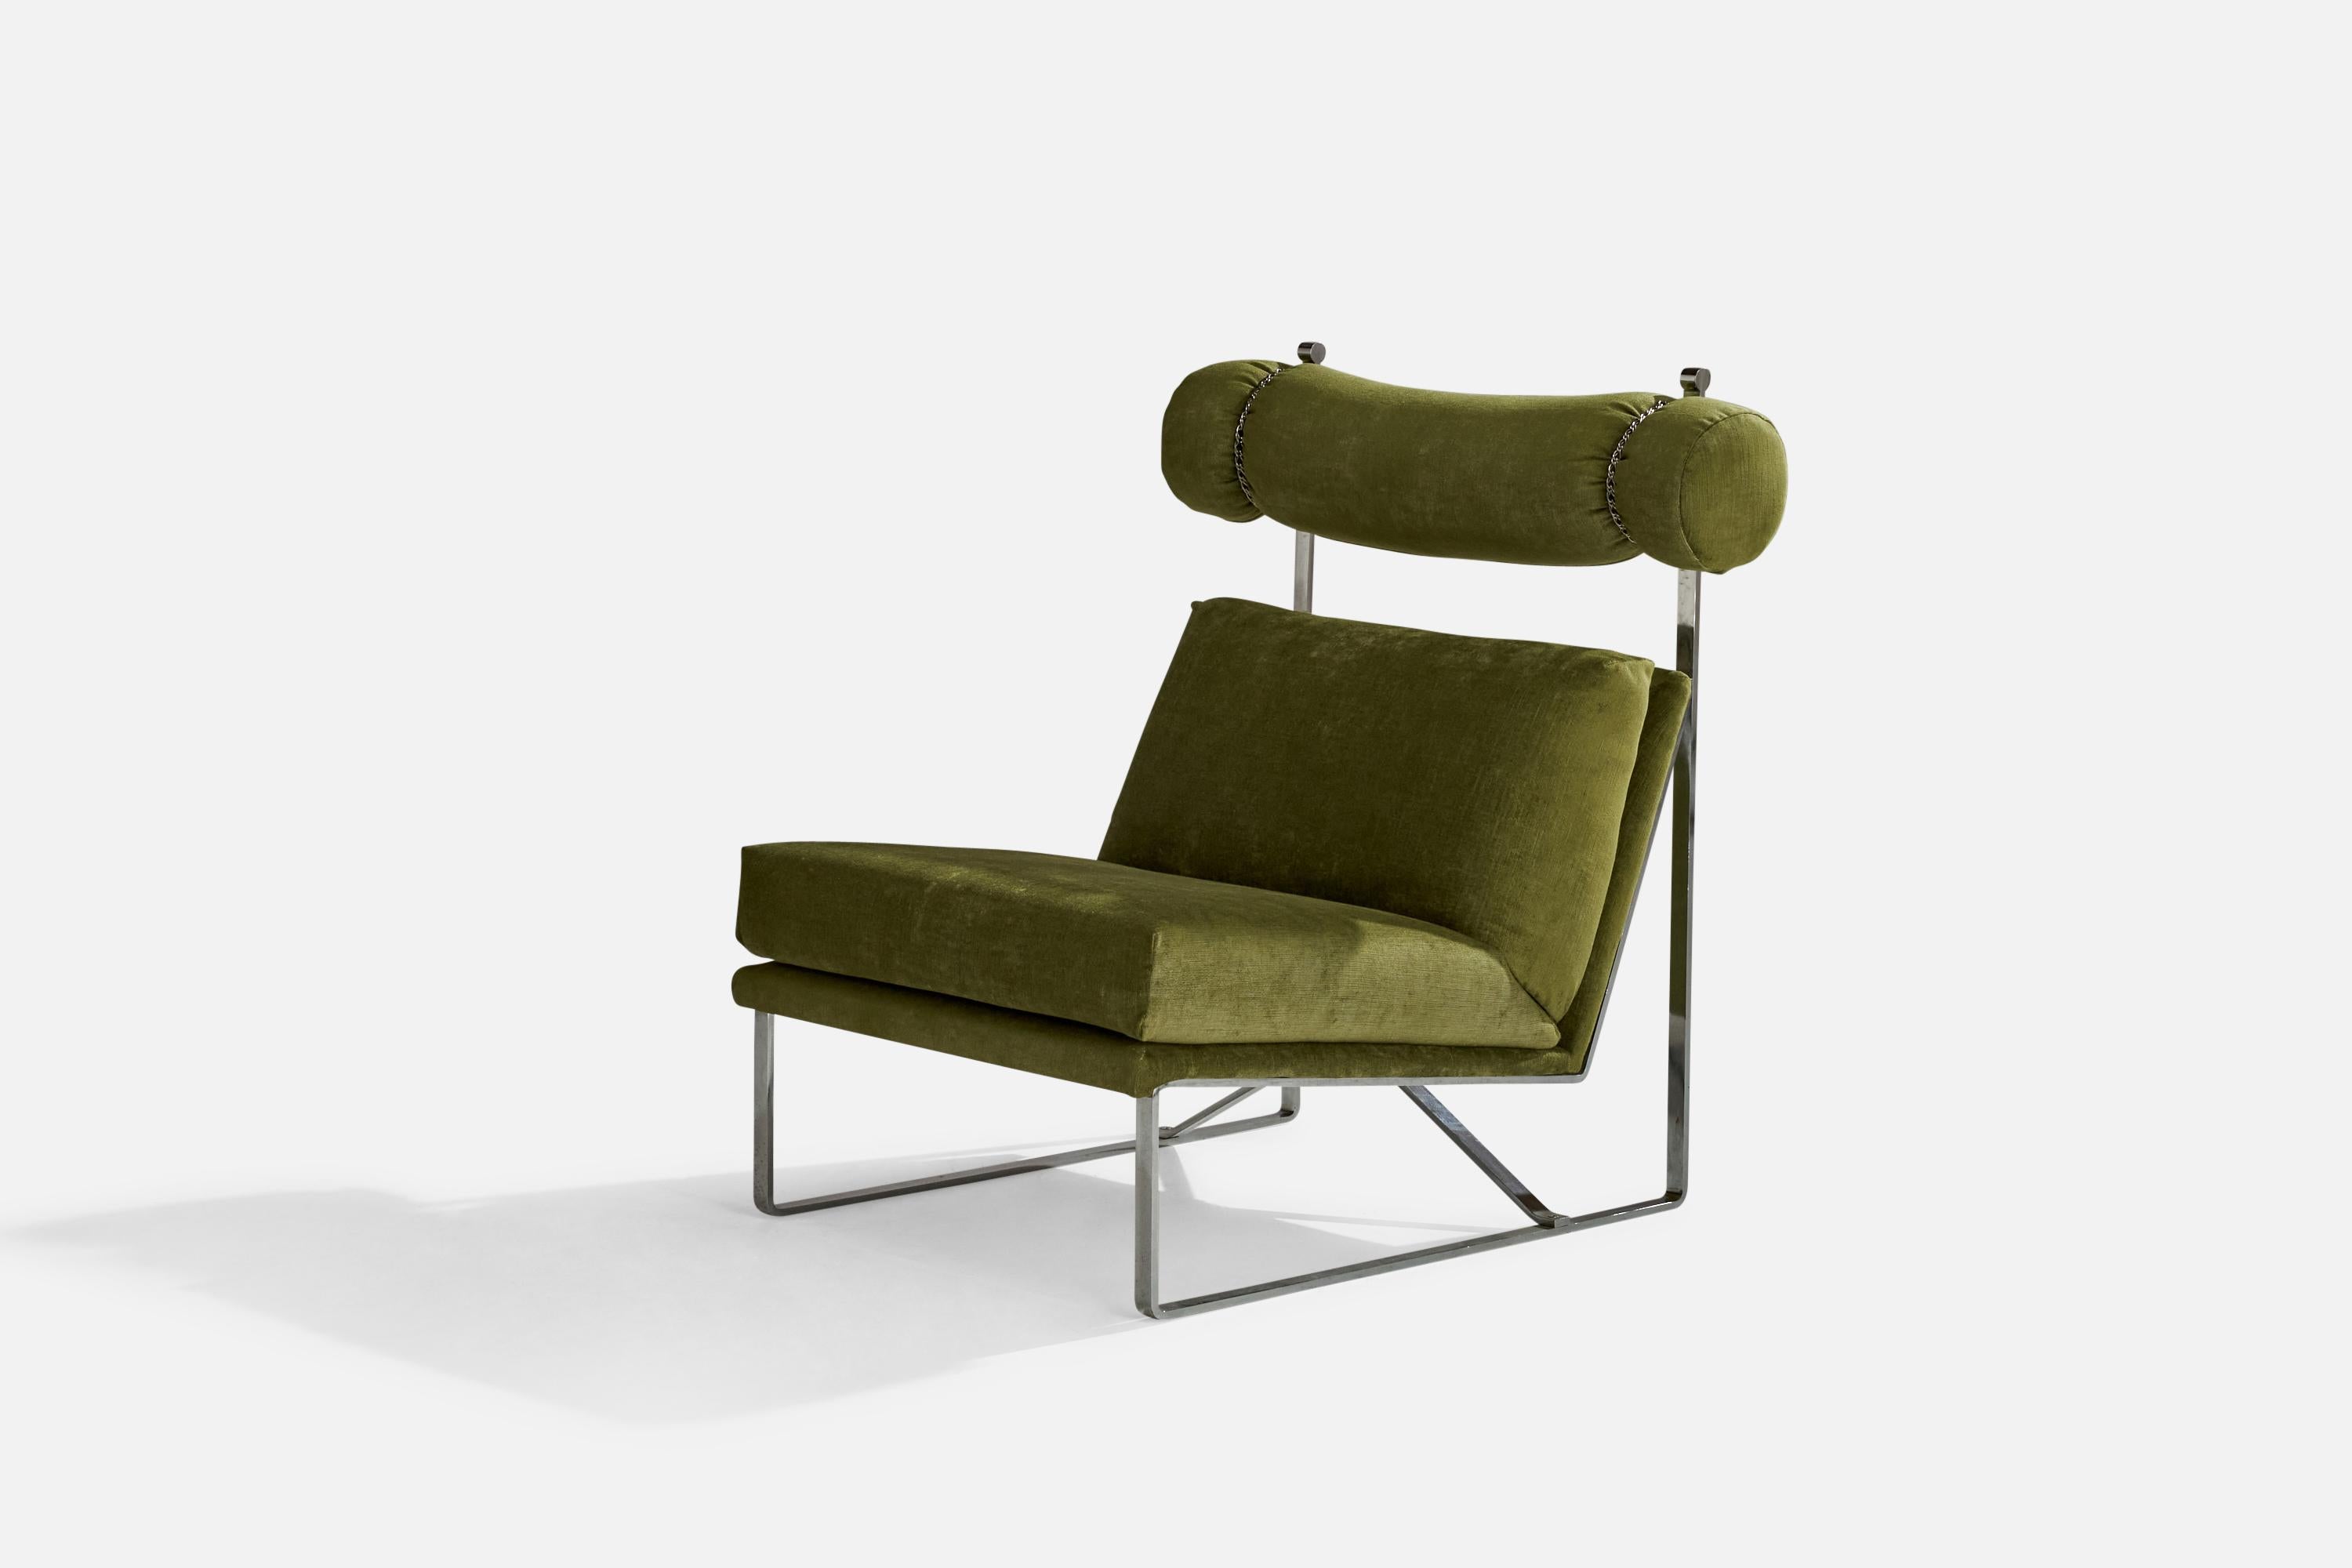 Late 20th Century Milo Baughman, Lounge Chair with Ottoman, Velvet, Steel, USA, 1970s For Sale